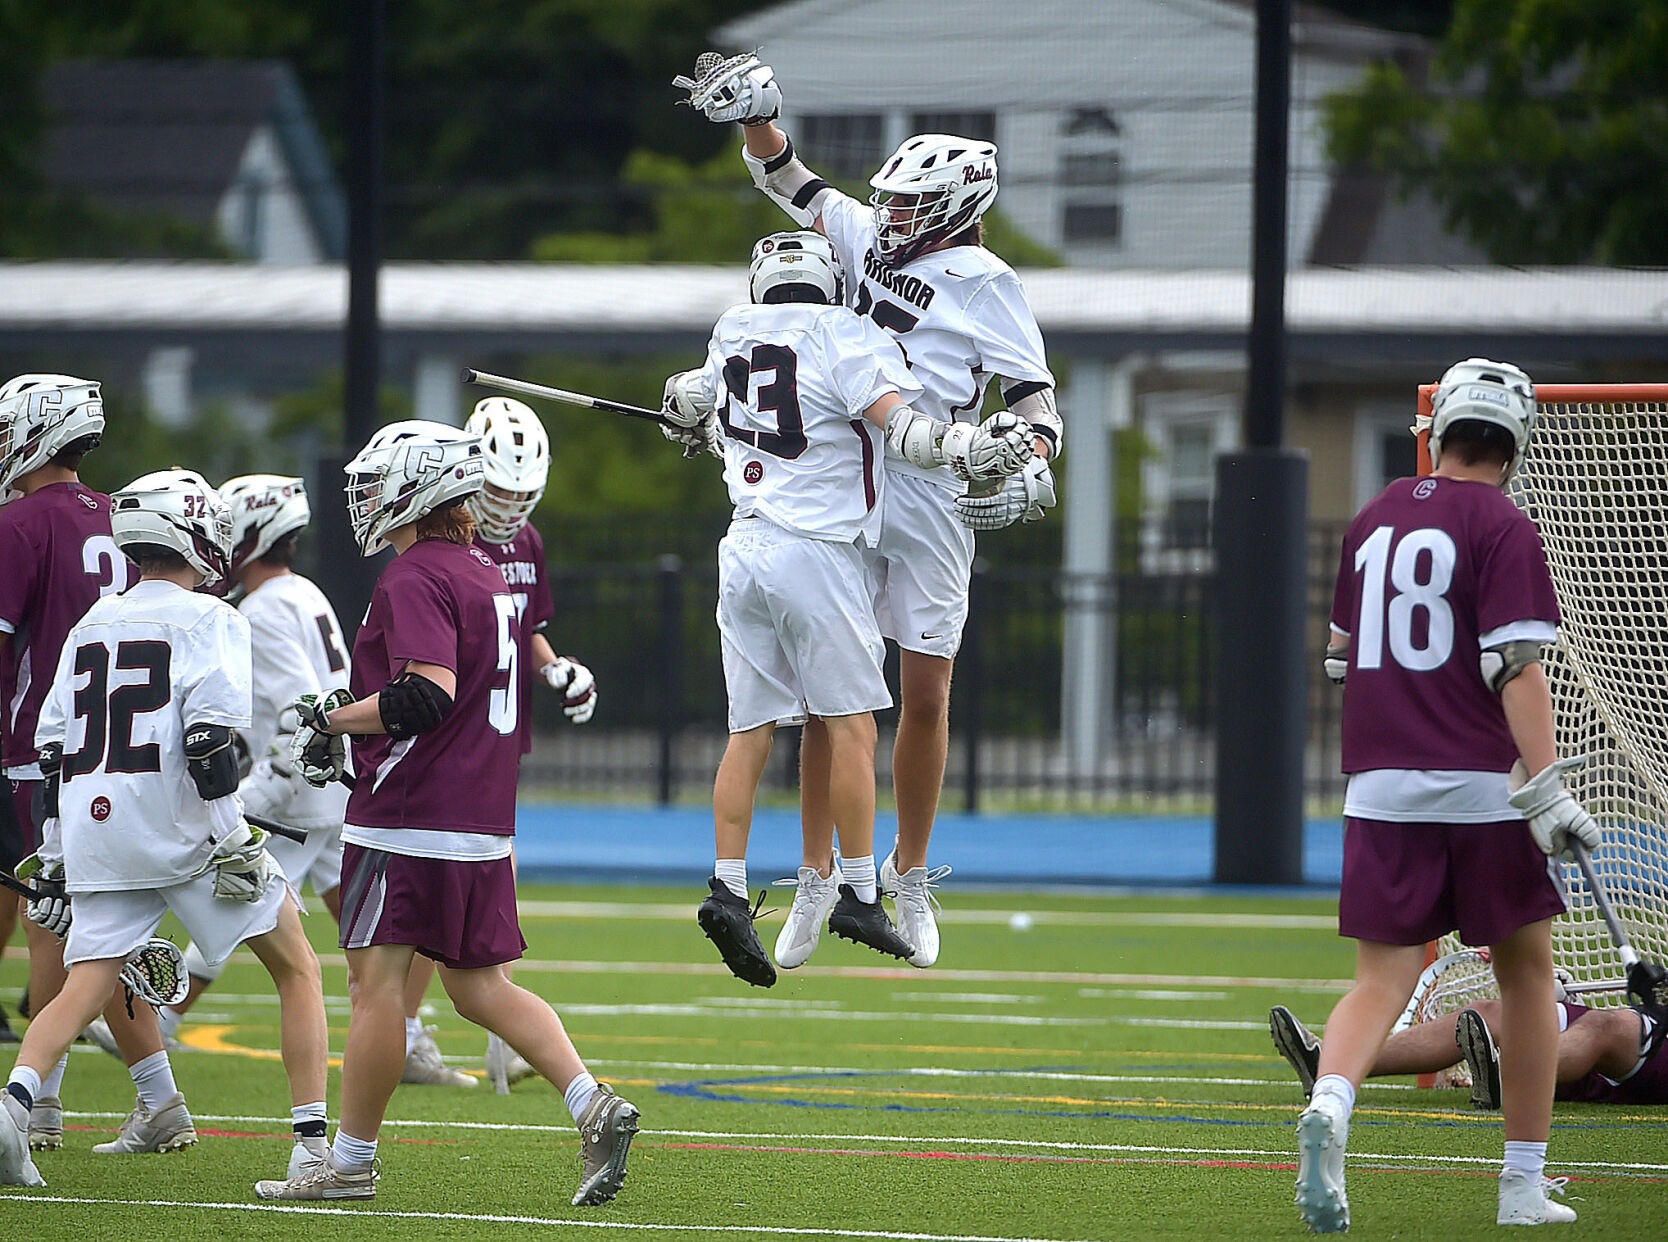 PIAA Class 3A Boys Lacrosse High and dry after delay, Radnor leaves